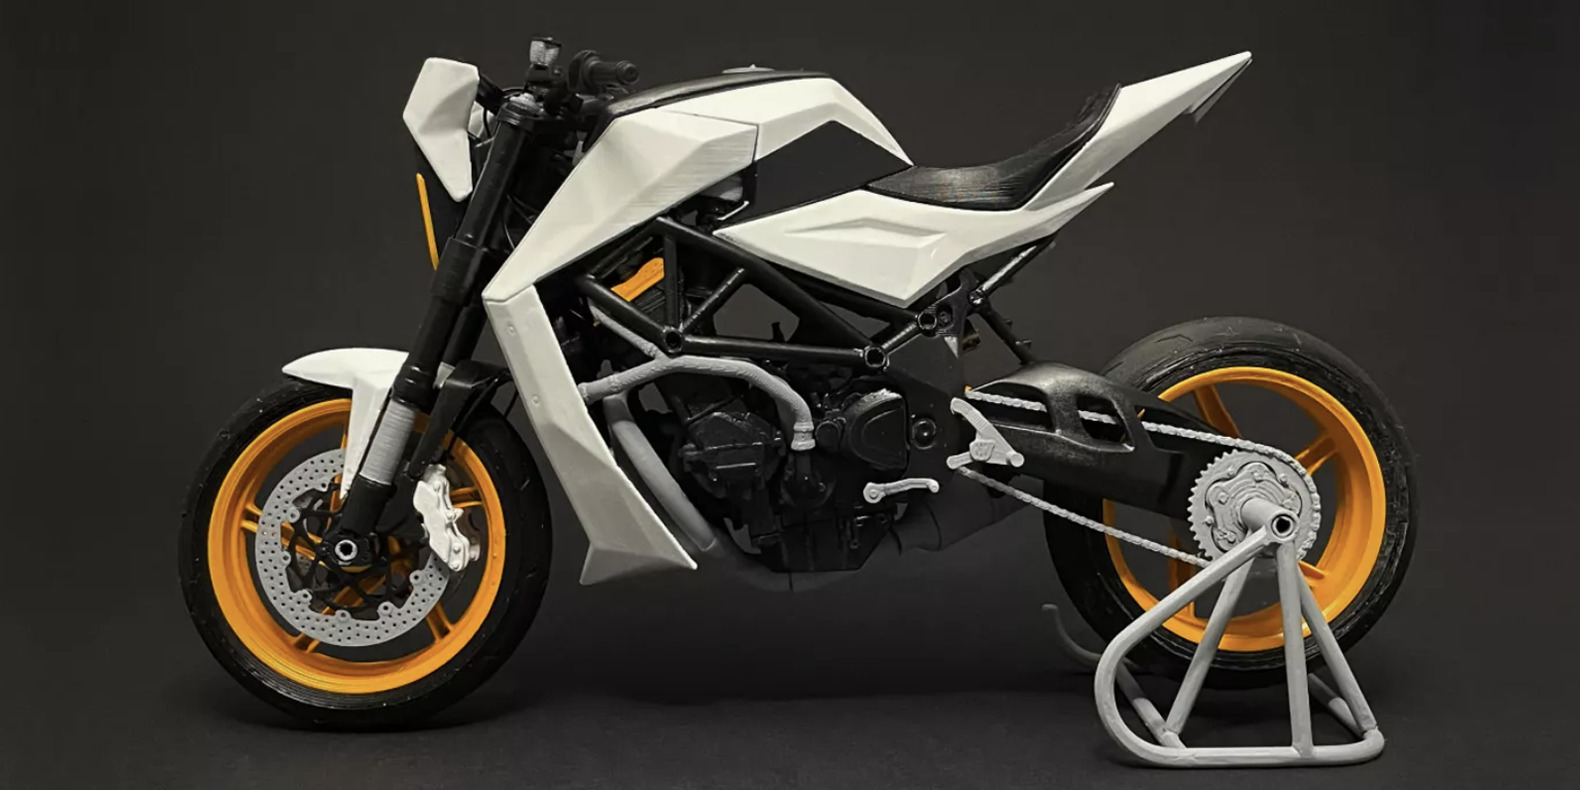 Find here a selection of the best motorbikes 3D models that can be done with a 3D printer.